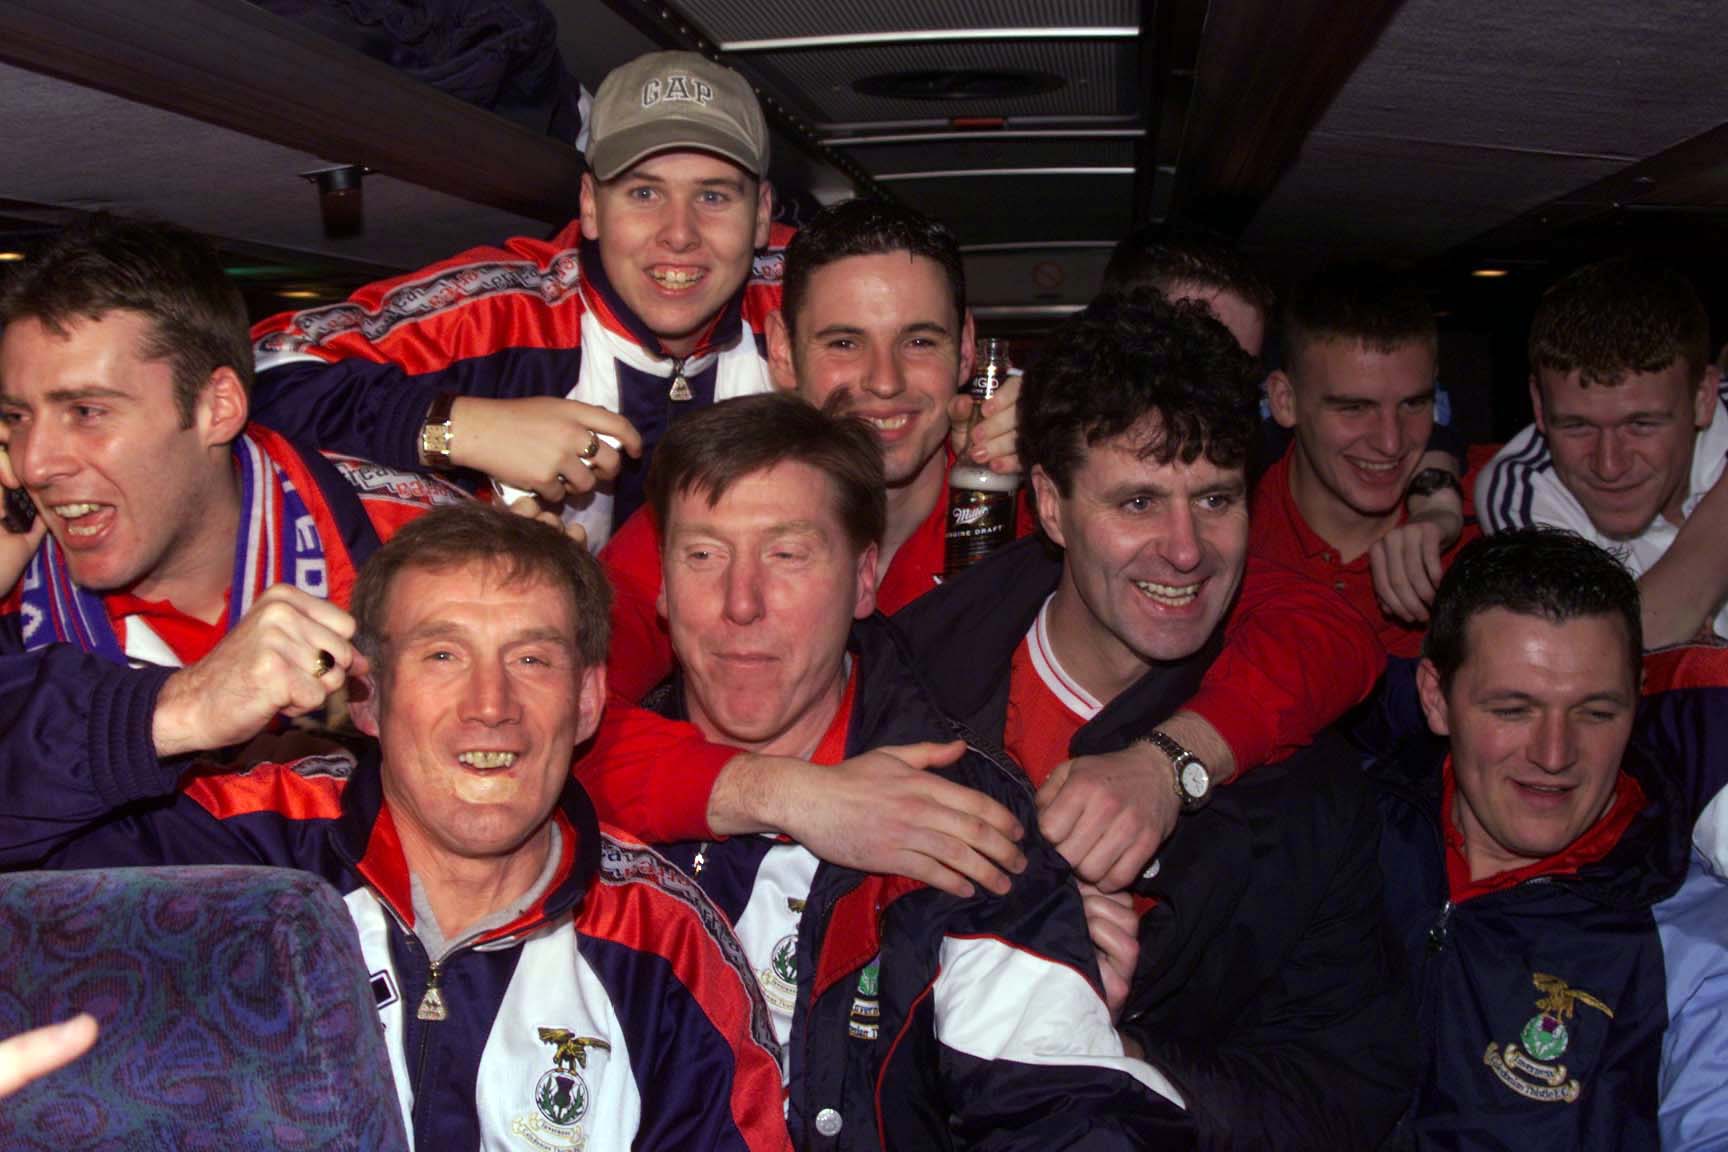 The Inverness players celebrate their victory with manage Steve Paterson on the team bus.